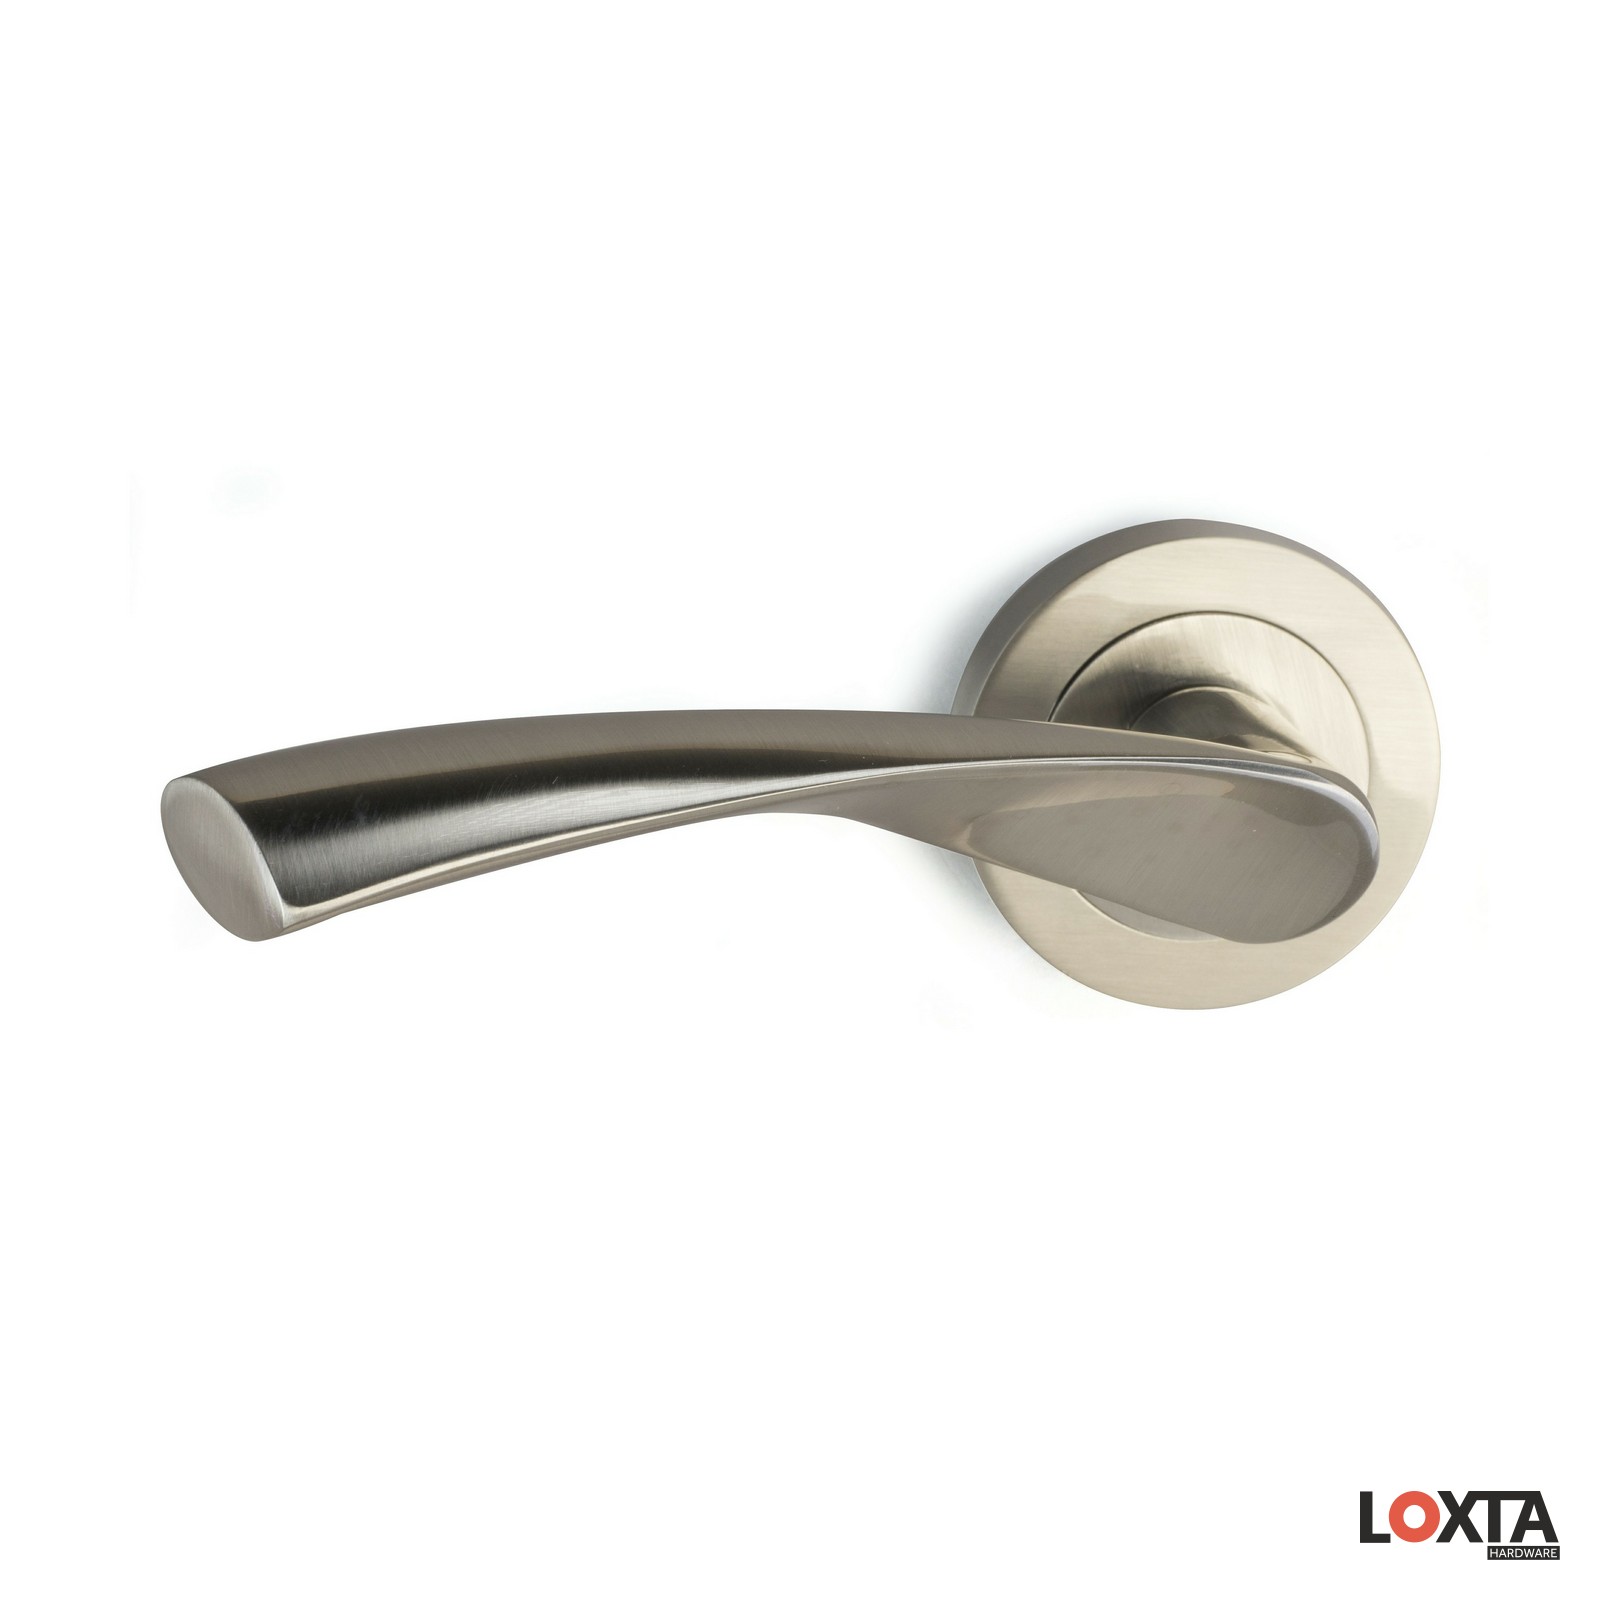 LT30010 Visby Door Handle on Round Rose, Hot Forged